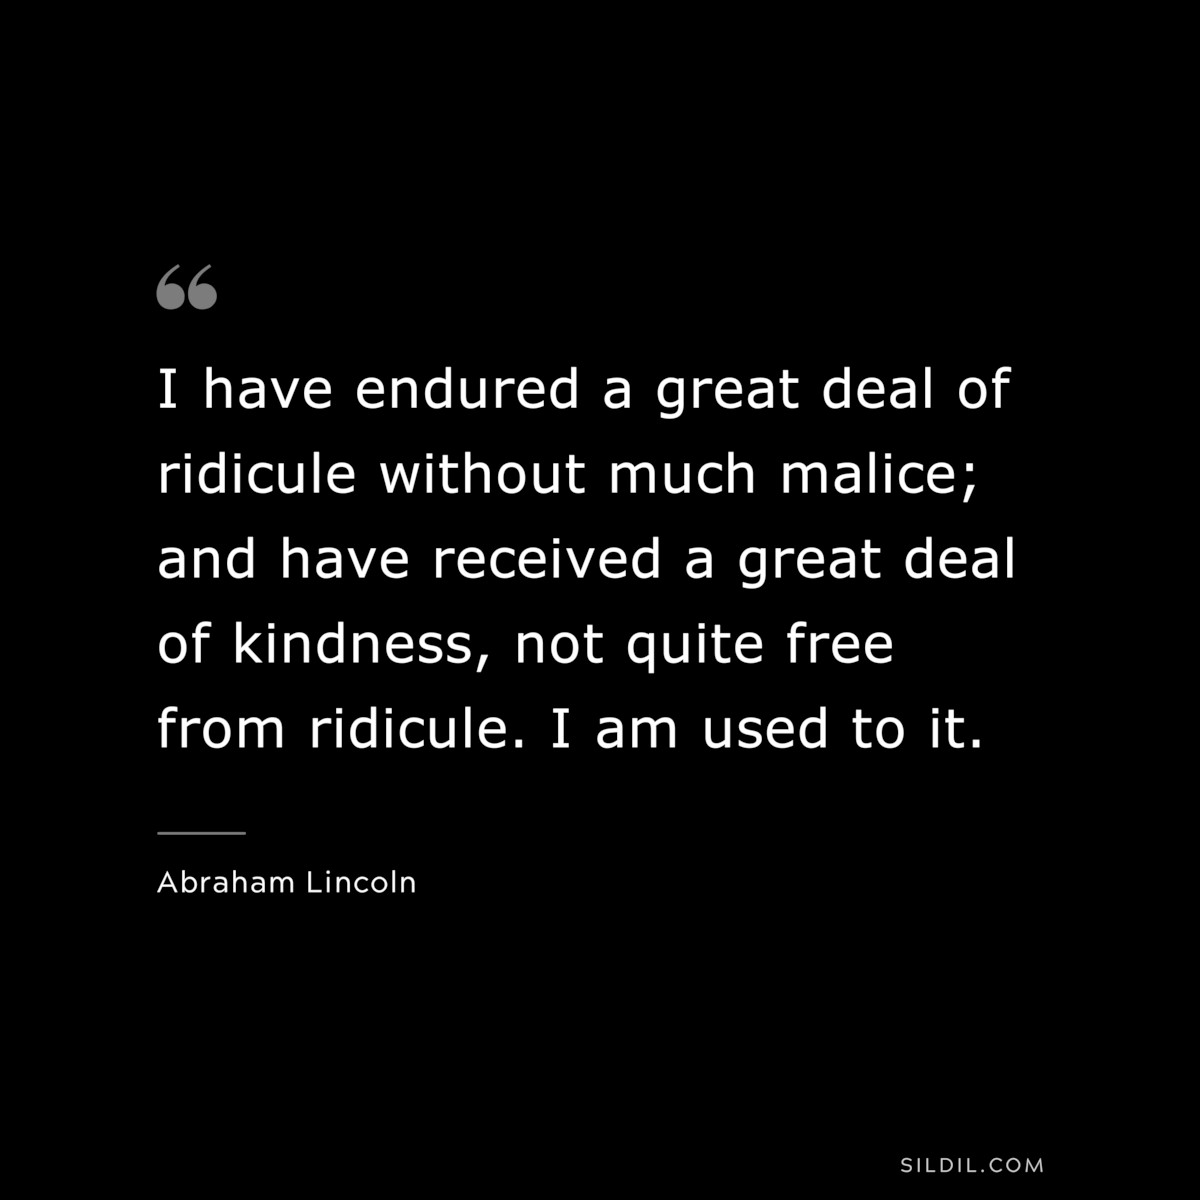 I have endured a great deal of ridicule without much malice; and have received a great deal of kindness, not quite free from ridicule. I am used to it. ― Abraham Lincoln